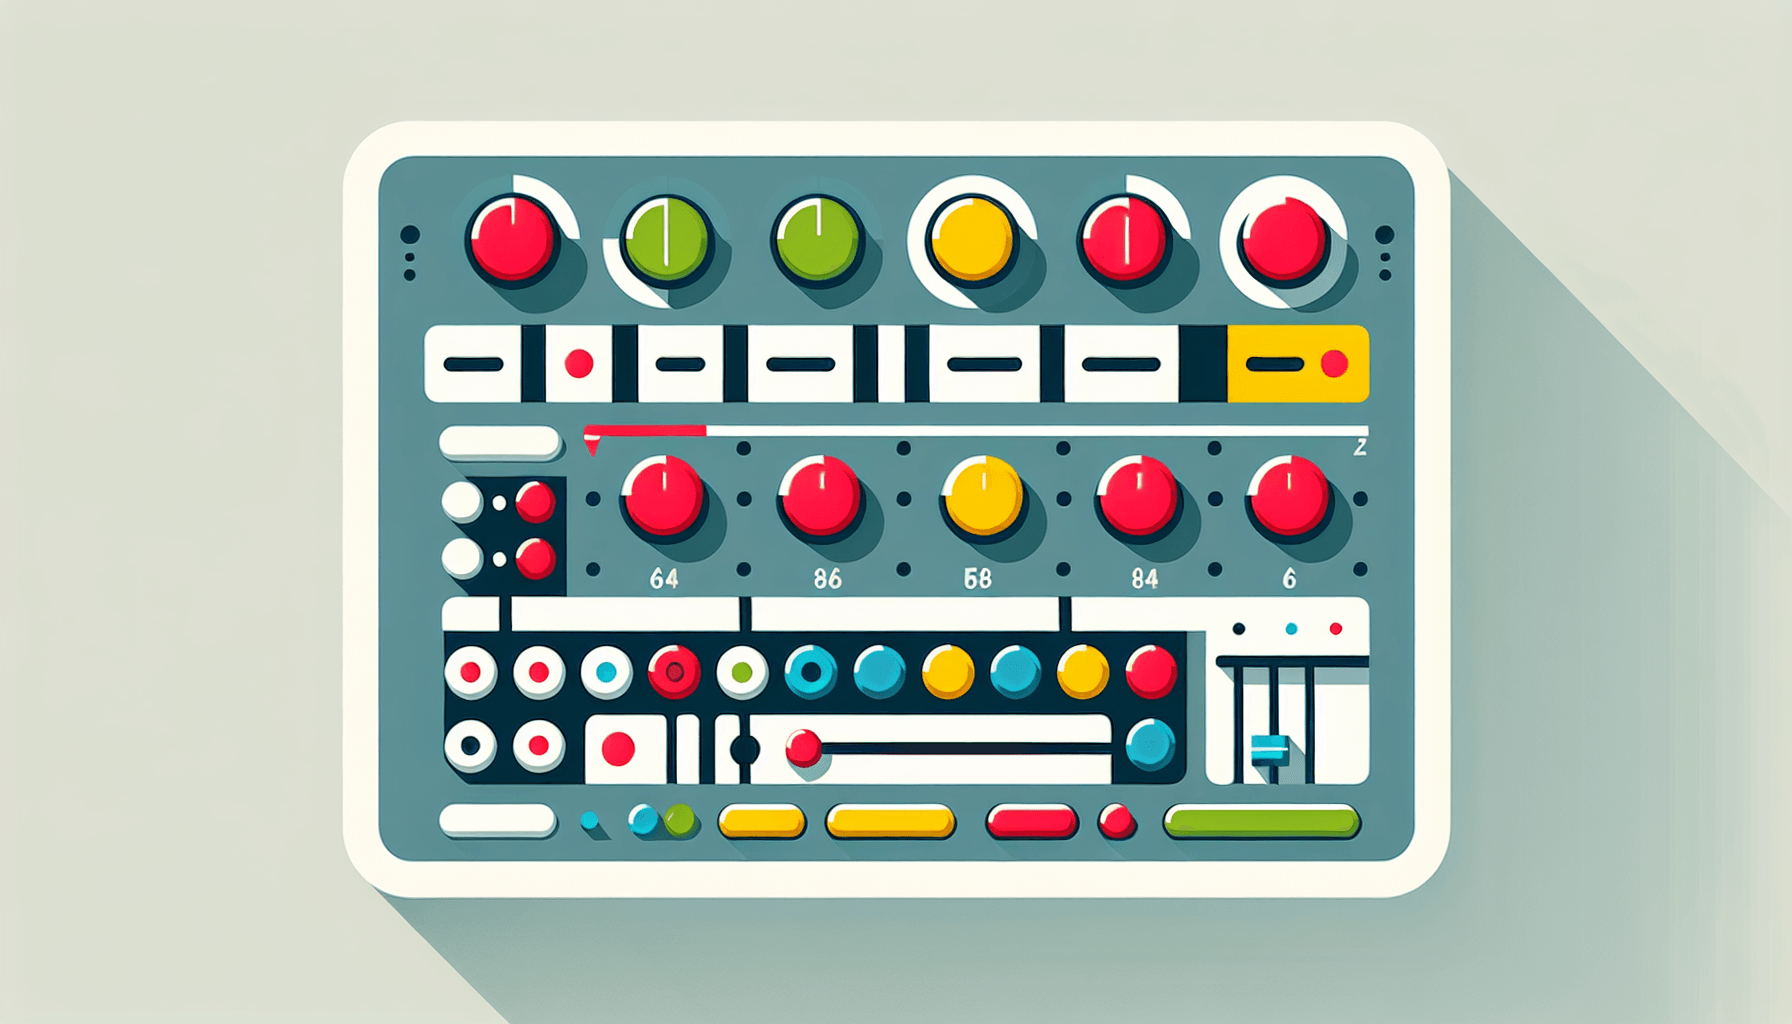 Control panel in flat illustration style and white background, red #f47574, green #88c7a8, yellow #fcc44b, and blue #645bc8 colors.